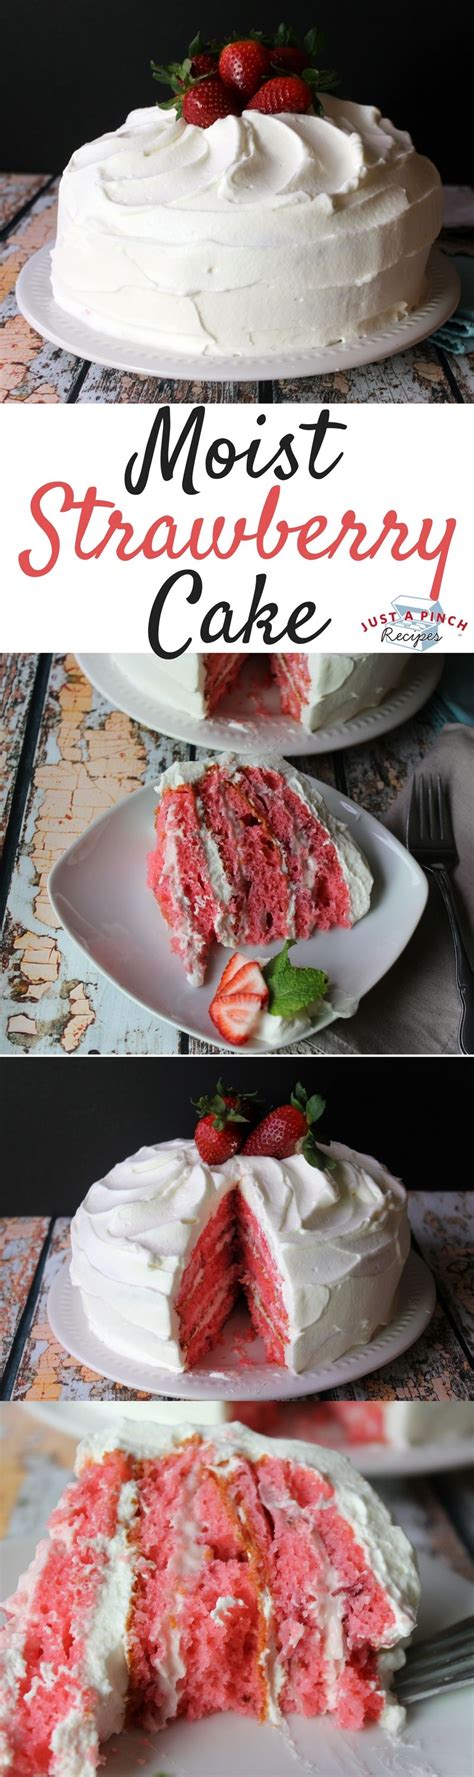 My mom used to make gumdrop cookies but never heard of. Oh my gosh, this is the mother of all strawberry cakes. It ...